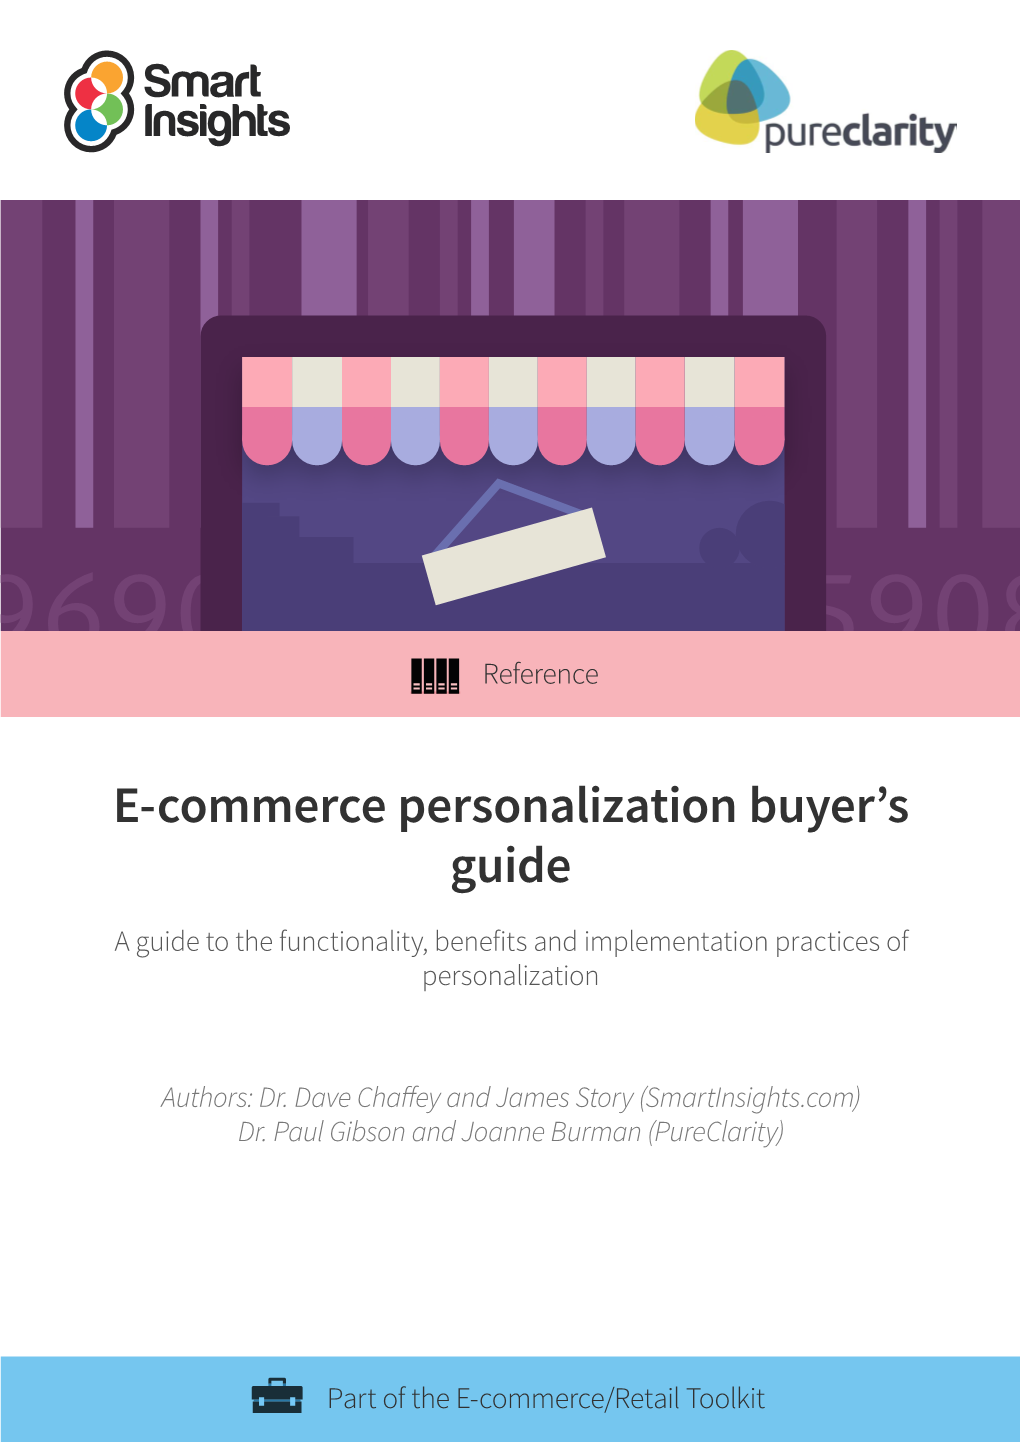 E-Commerce Personalization Buyer's Guide © Smart Insights (Marketing Intelligence) Limited